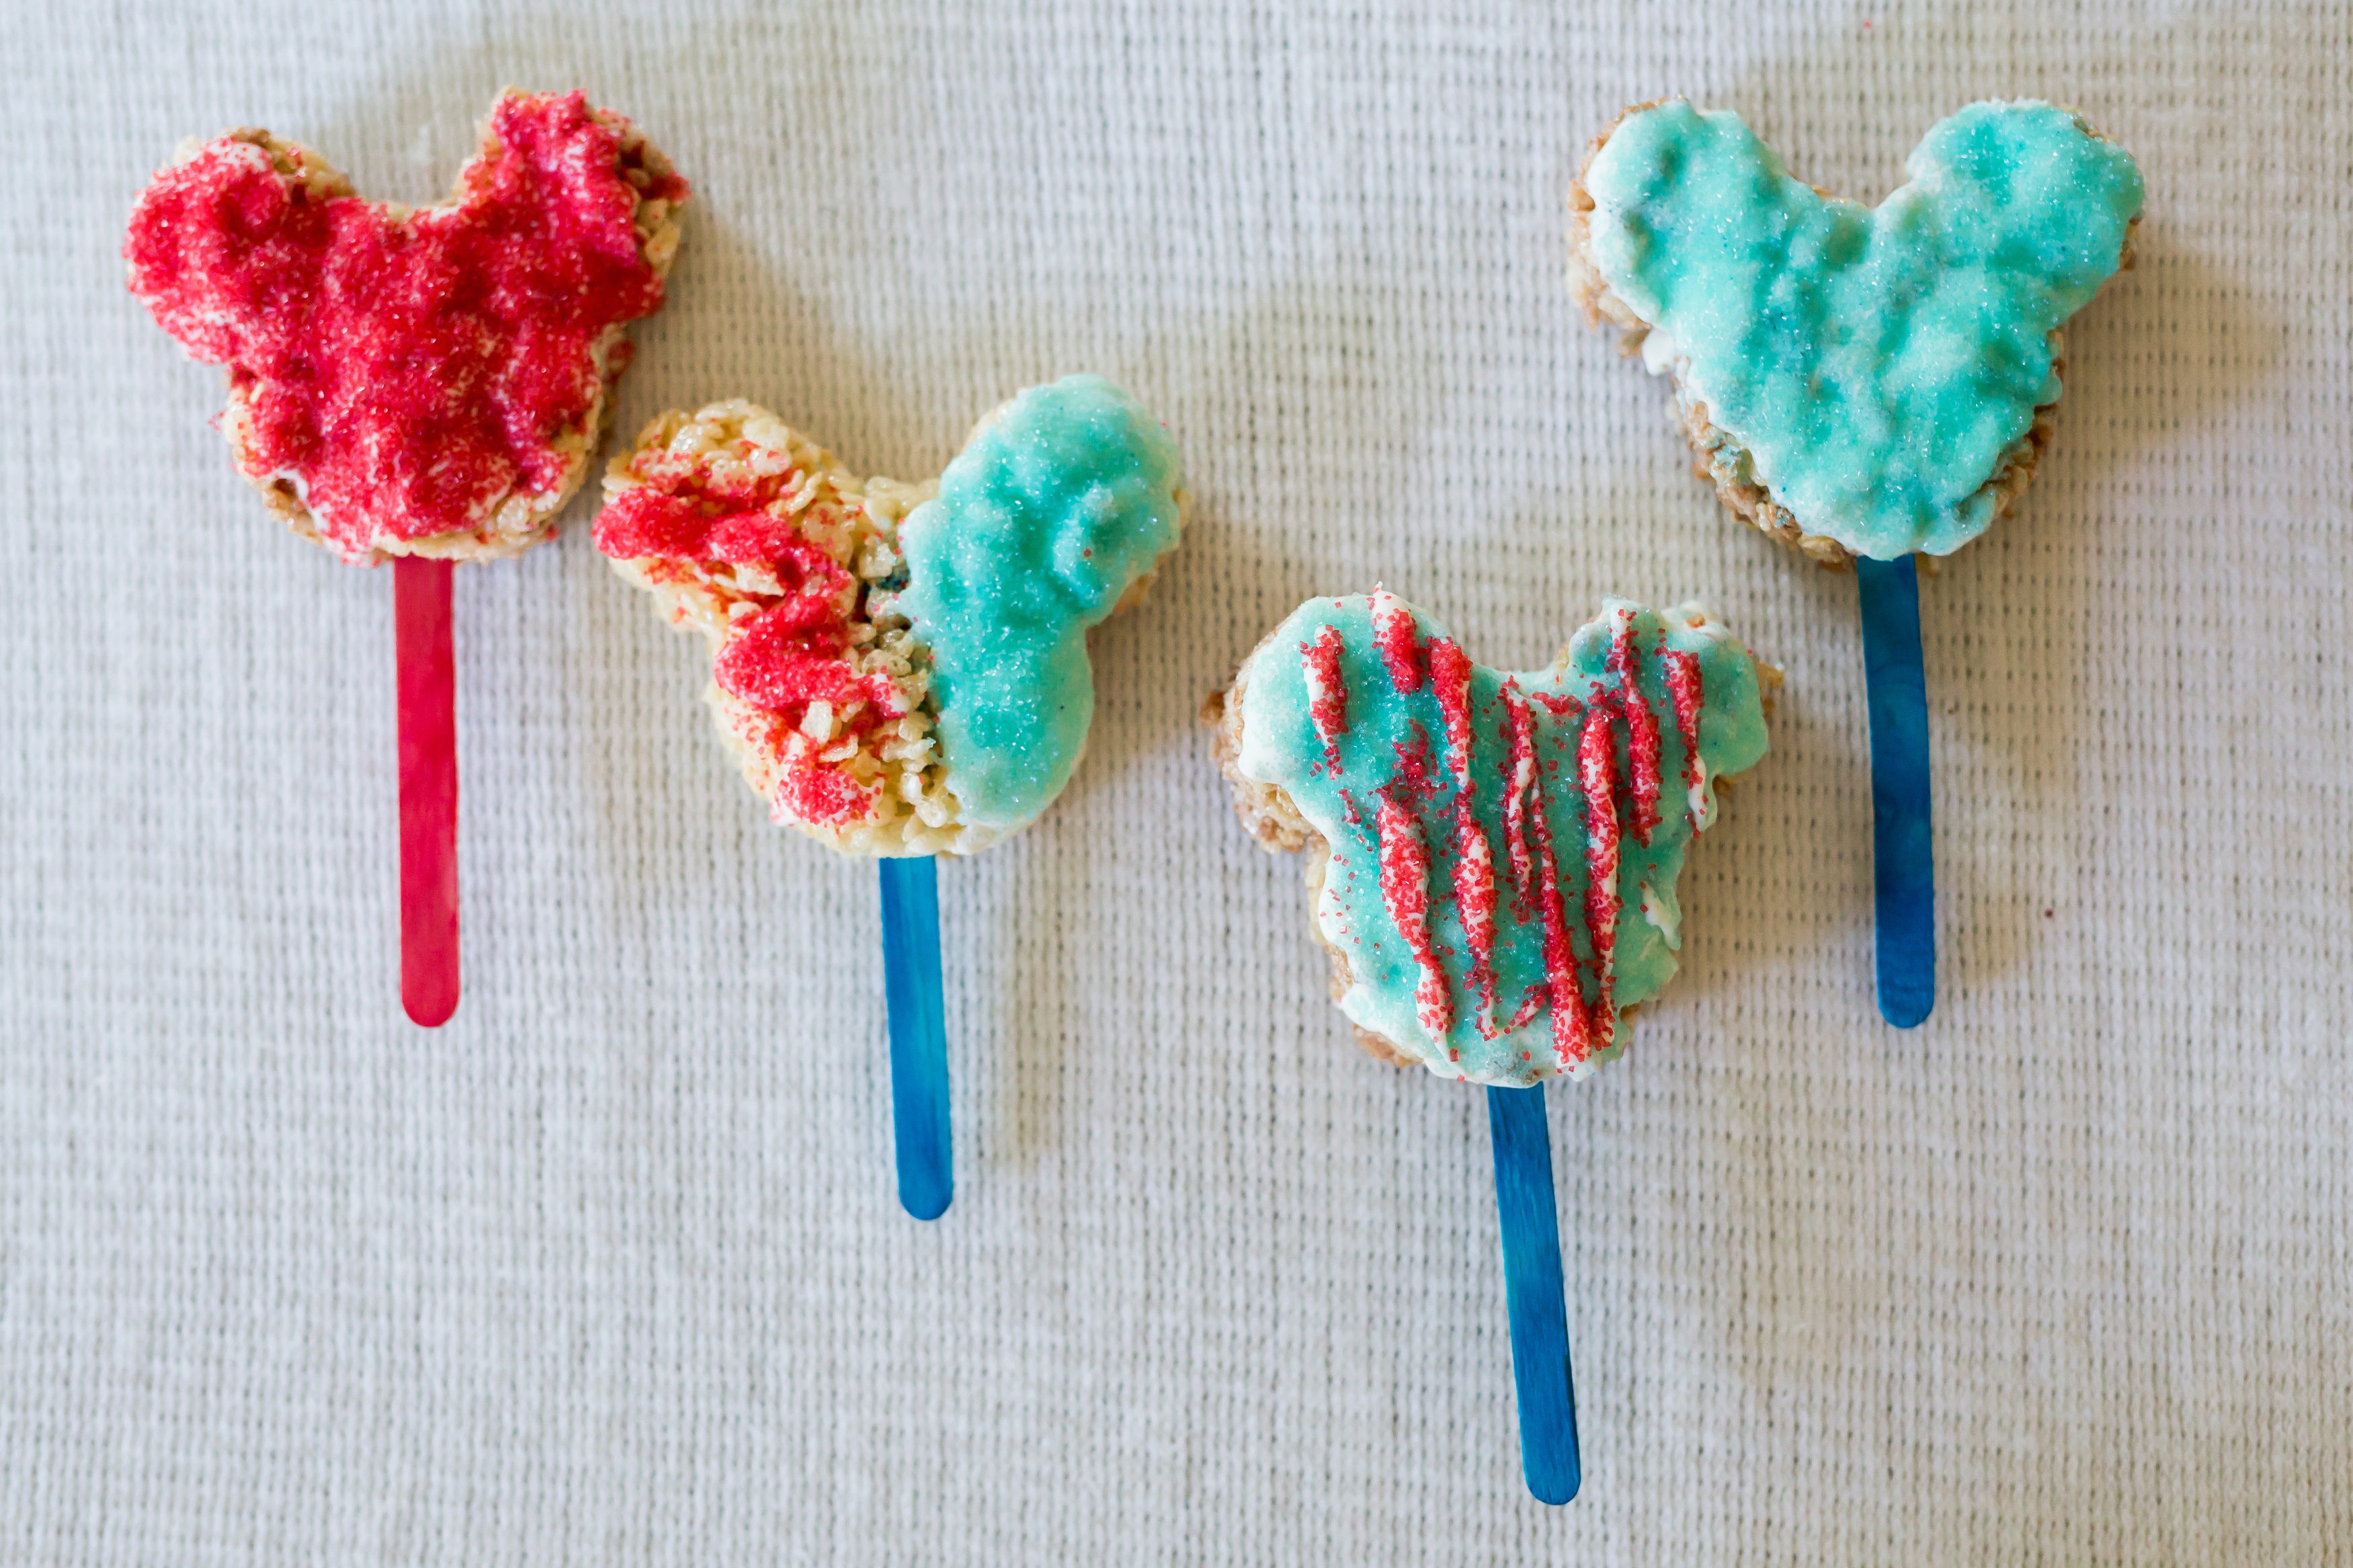 Mickey 4th of July Rice Krispie Treat, disney at Home, Rice Krispie treat at home, Magic for miles at home